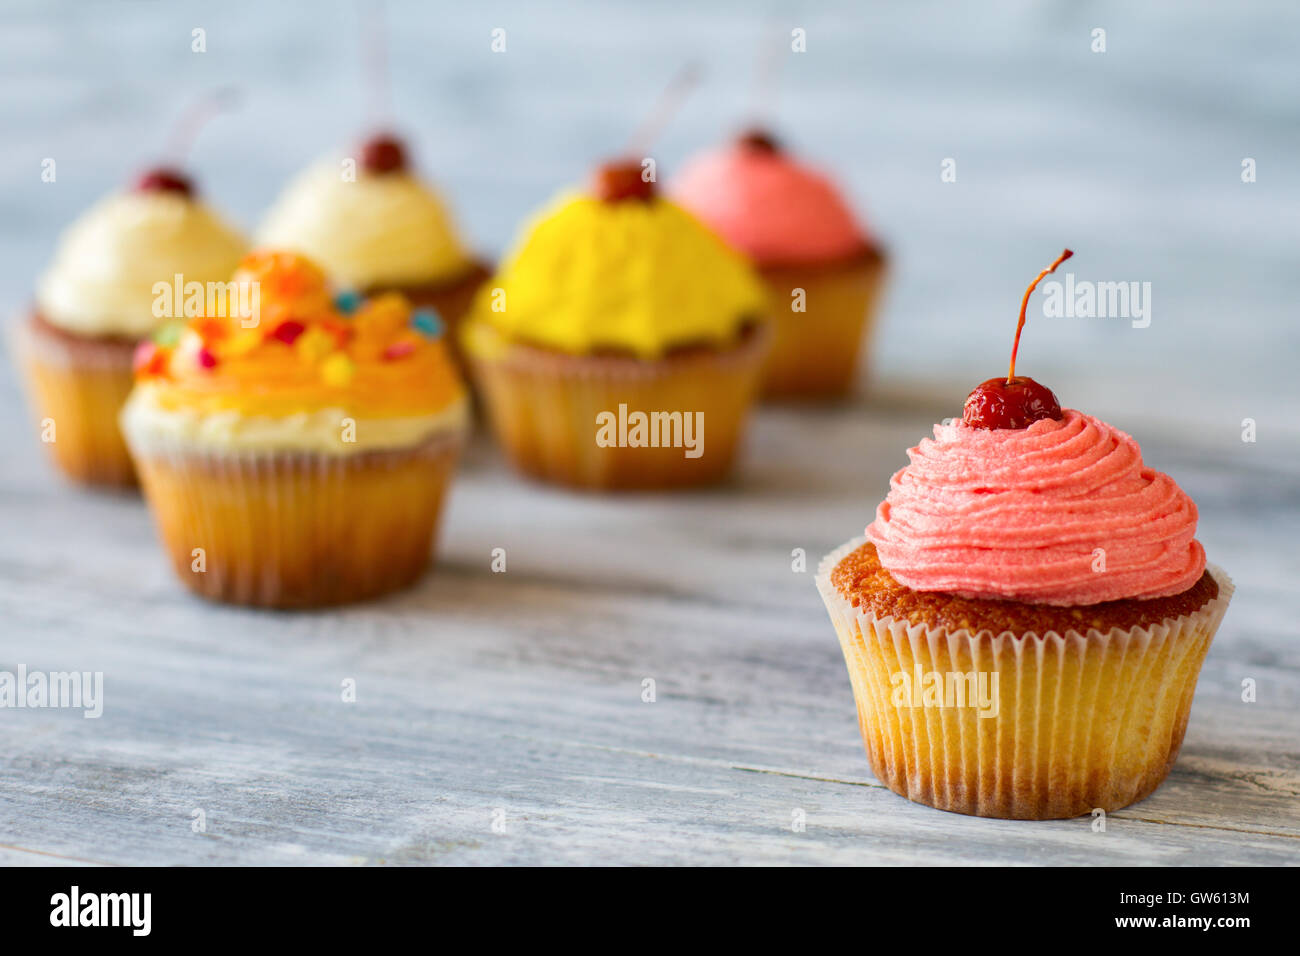 Cupcake with pink frosting. Stock Photo